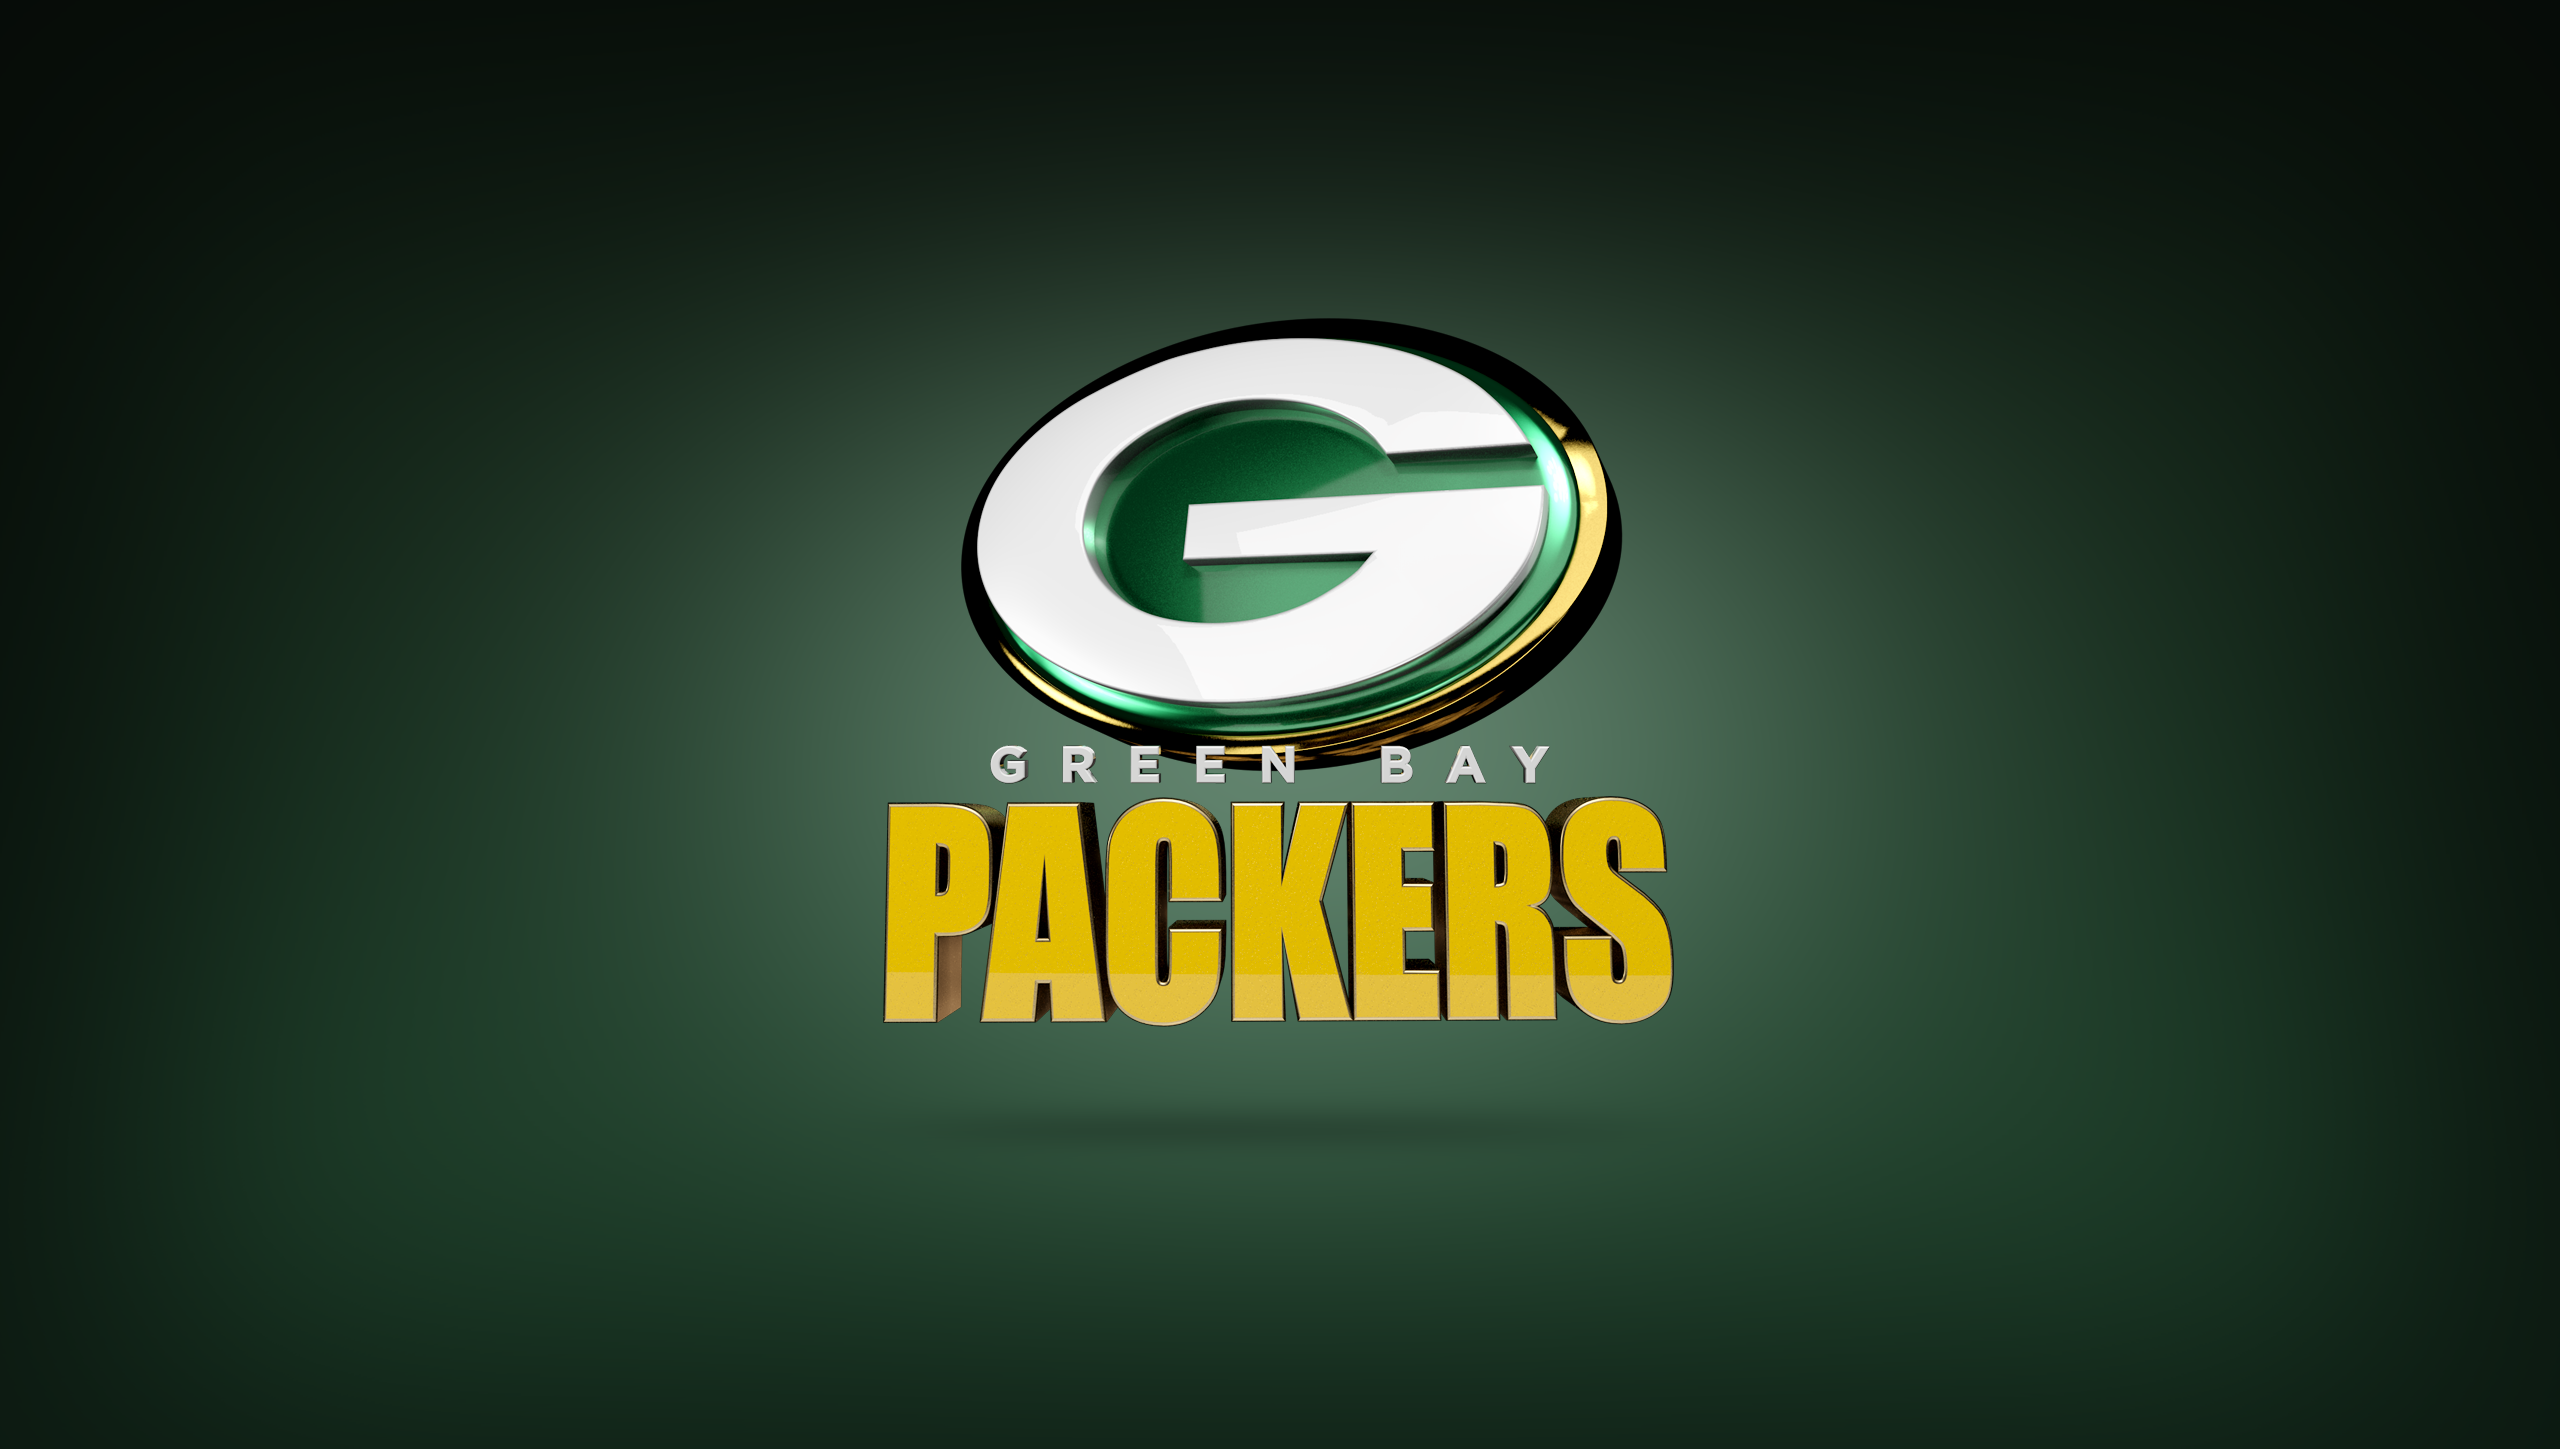 Free Download Green Bay Packers By Beaware8 On [2560x1440] For Your Desktop Mobile And Tablet